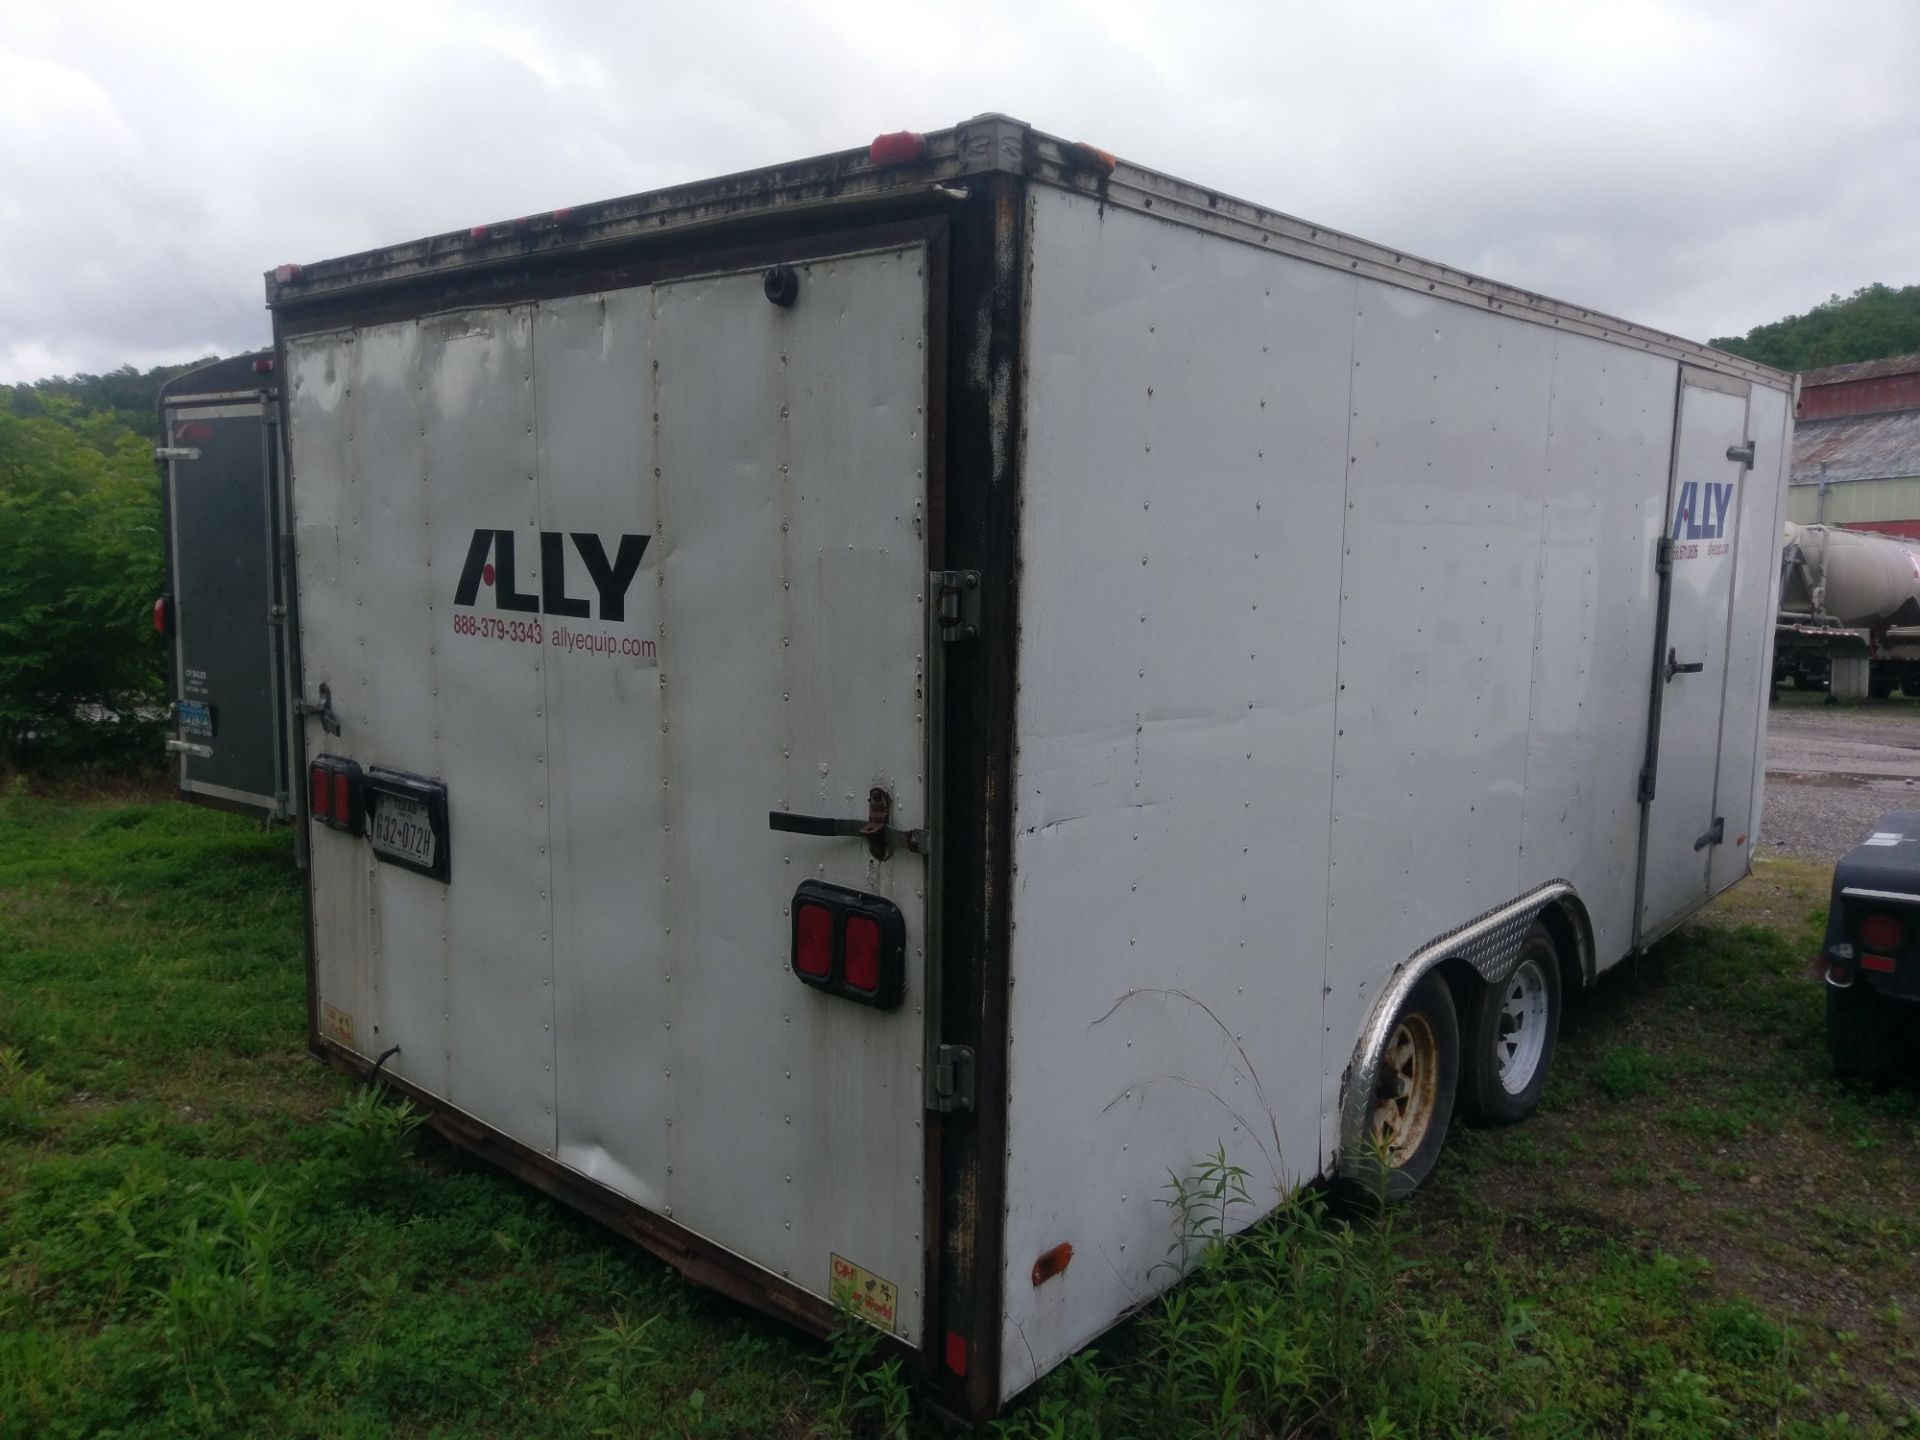 2001 PACE TANDEM AXLE ENCLOSED TRAILER; VIN # 47ZWB18231X011149, BALL HITCH, 8' X 18', REAR FOLD - Image 3 of 4